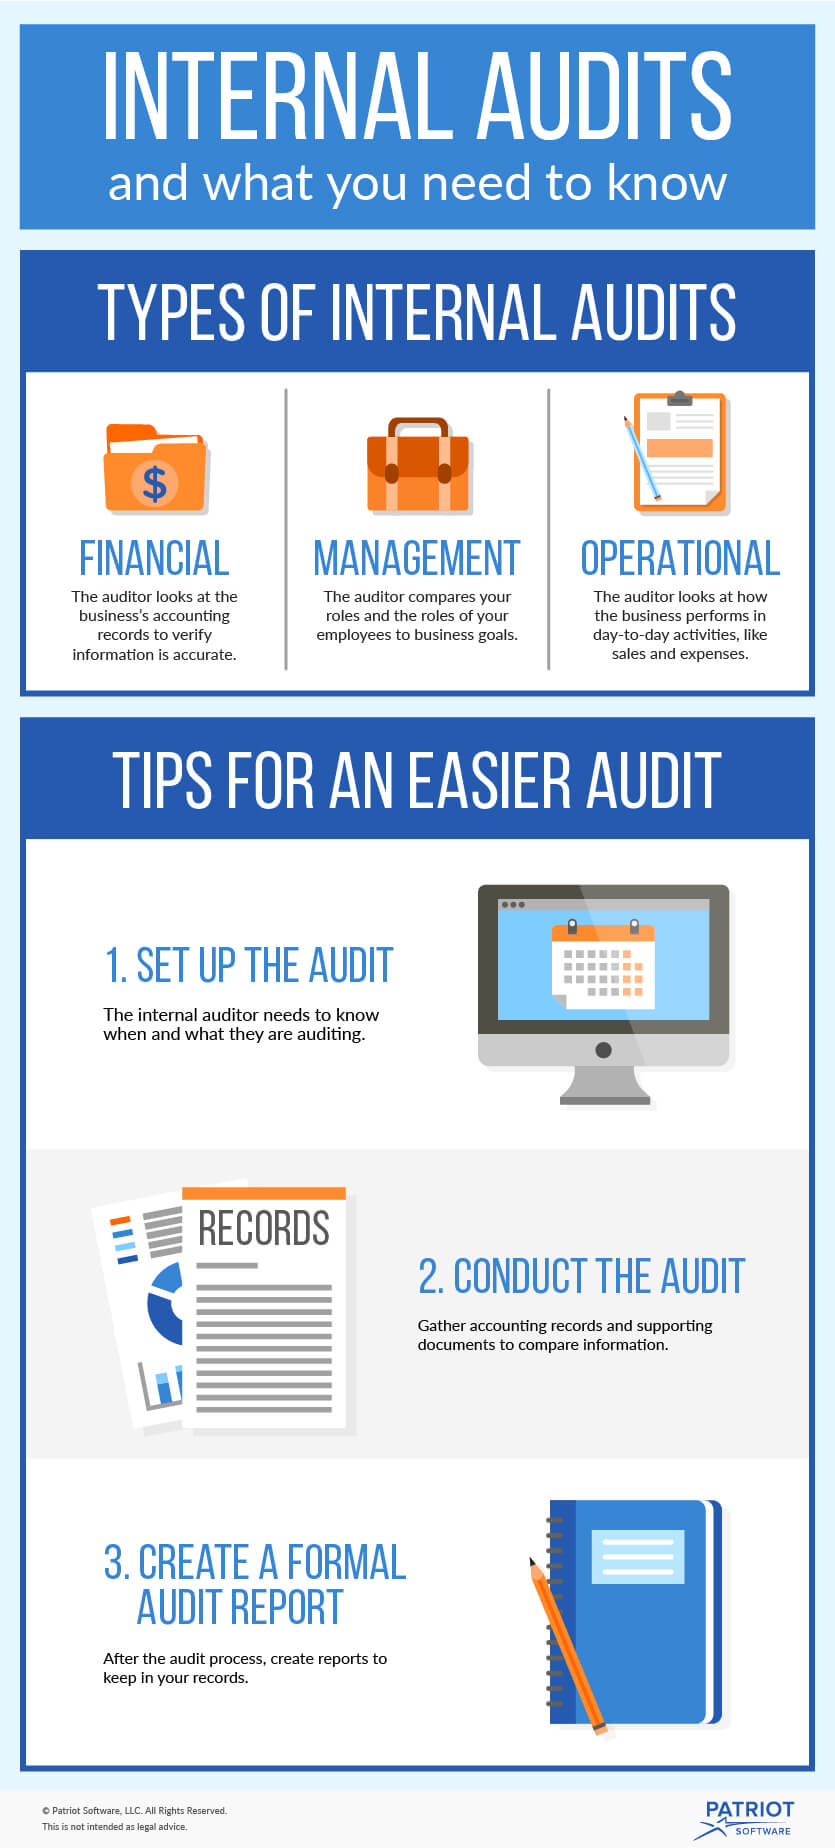 What Is an Internal Audit?